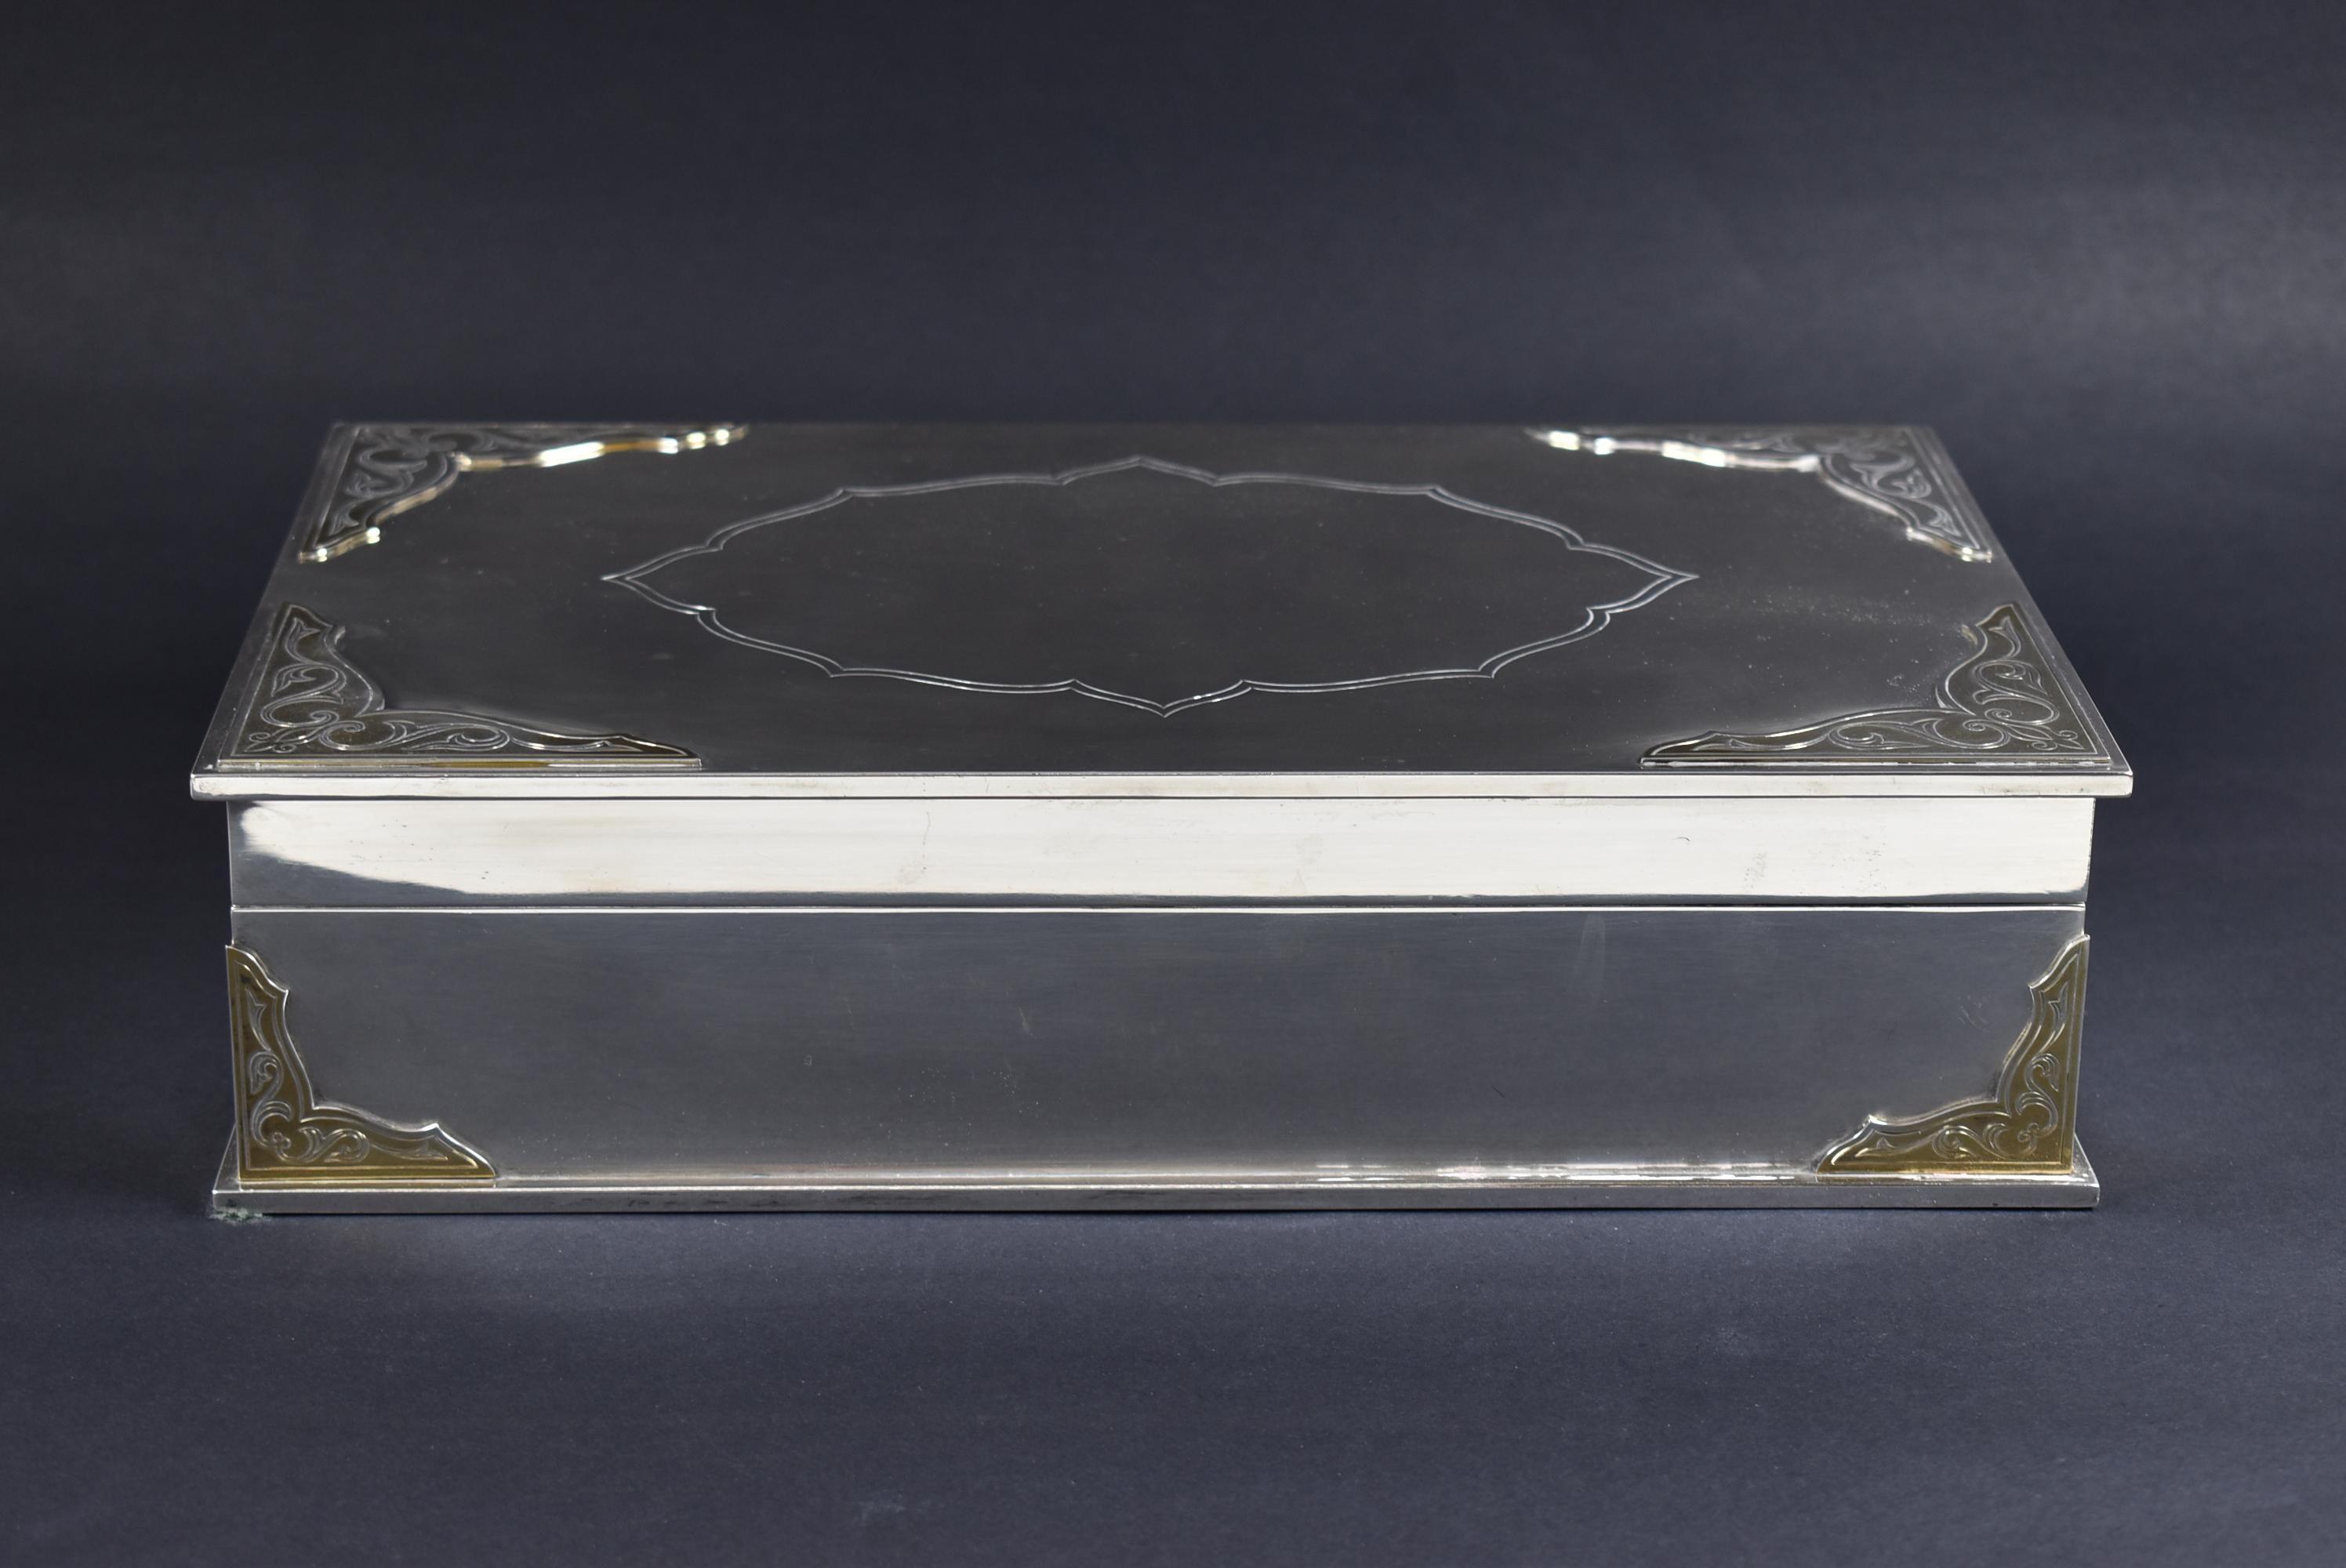 Vintage Garrard & Co. 112 Regency street sterling silver jewelry box lined in velvet. and weighs 84 oz. Dimensions: 7.5